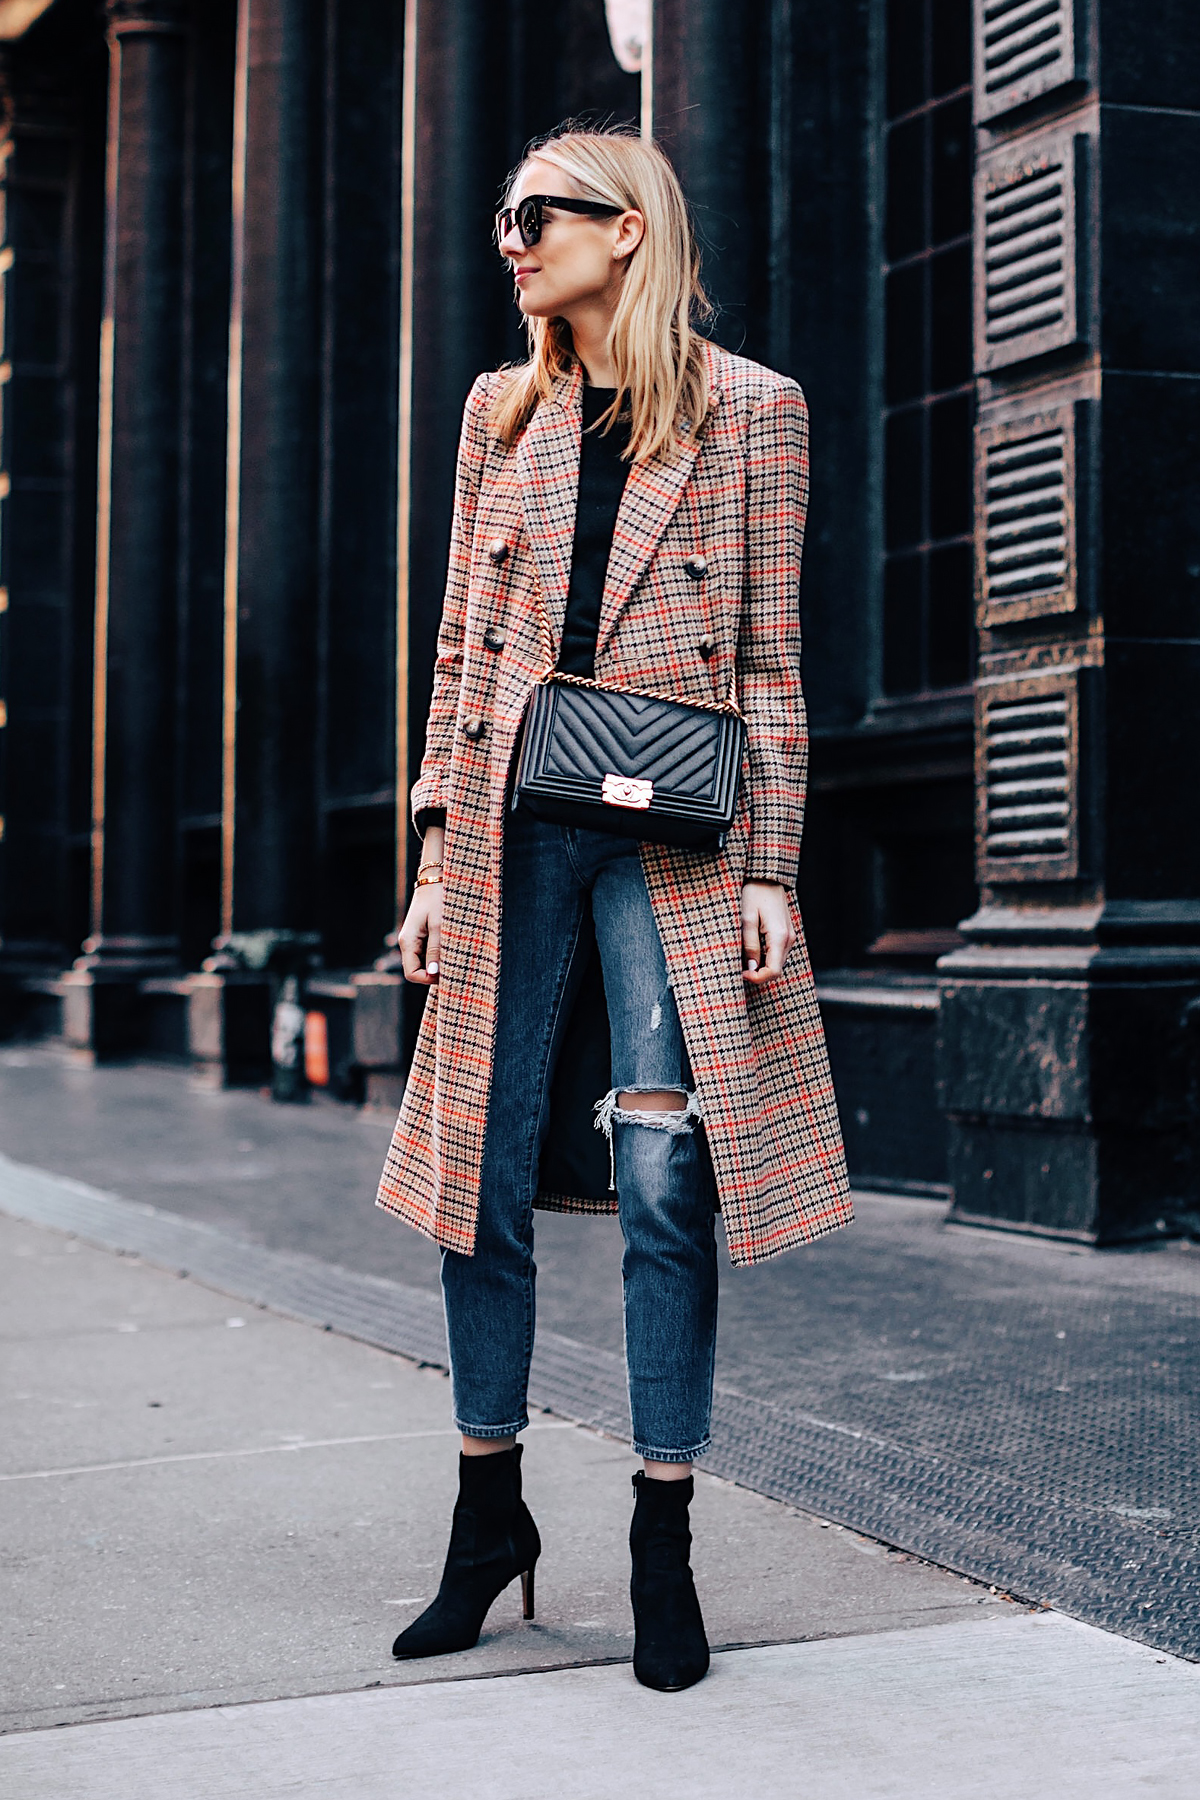 Blonde Woman Wearing Topshop Plaid Long Coat Black Sweater Levis Wedgie Fit Ripped Jeans Black Booties Chanel Boy Bag Black Fashion Jackson Fashion Blogger NYFW Street Style